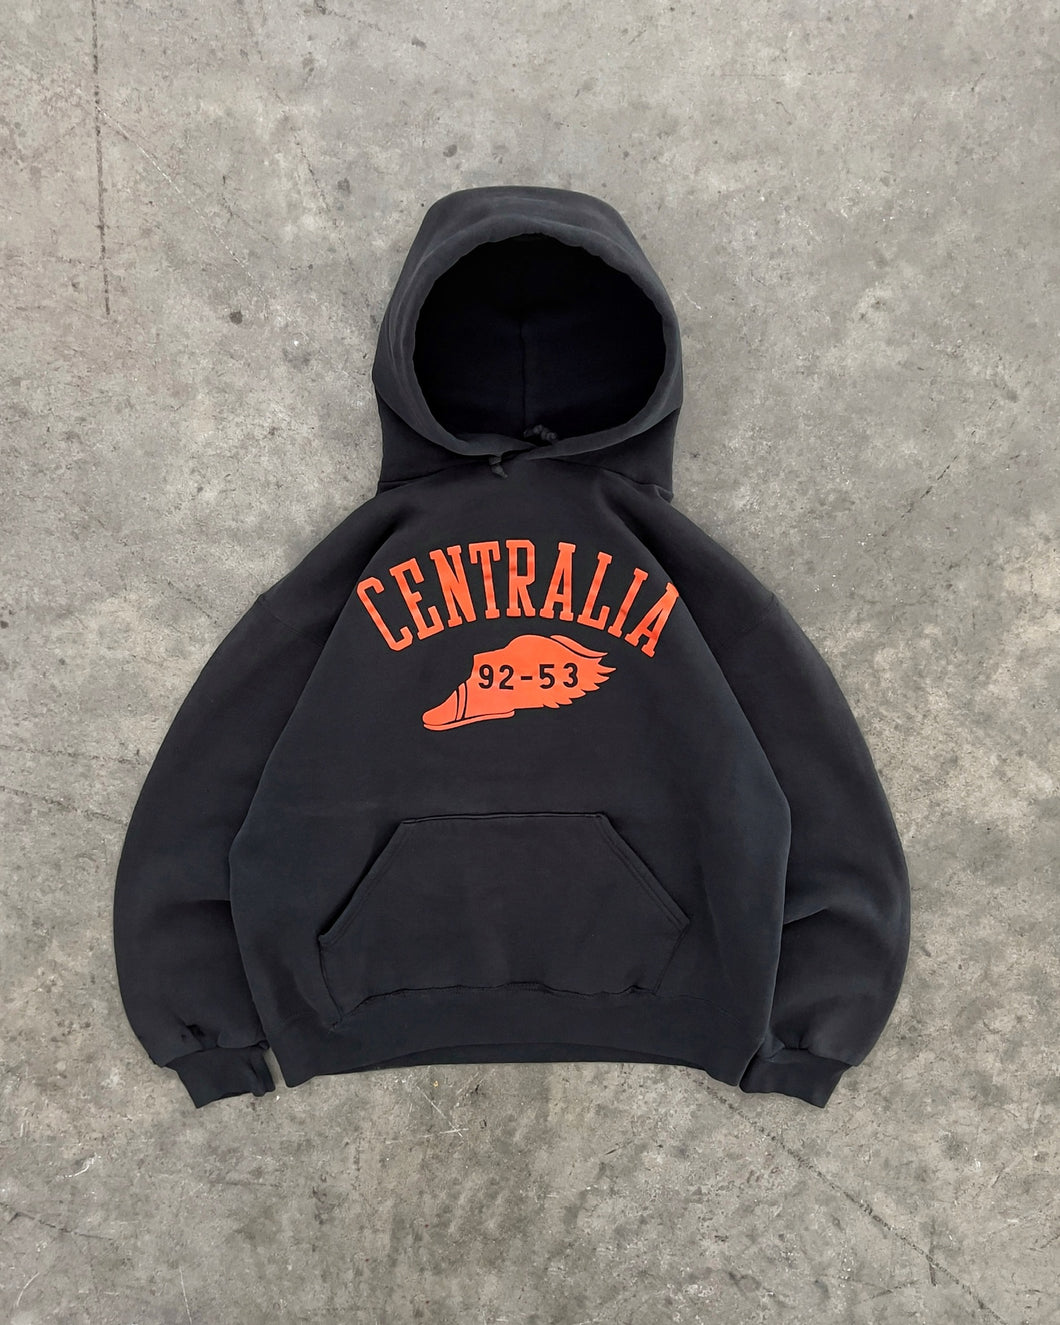 FADED BLACK “CENTRALIA” RUSSELL HOODIE - 1980S